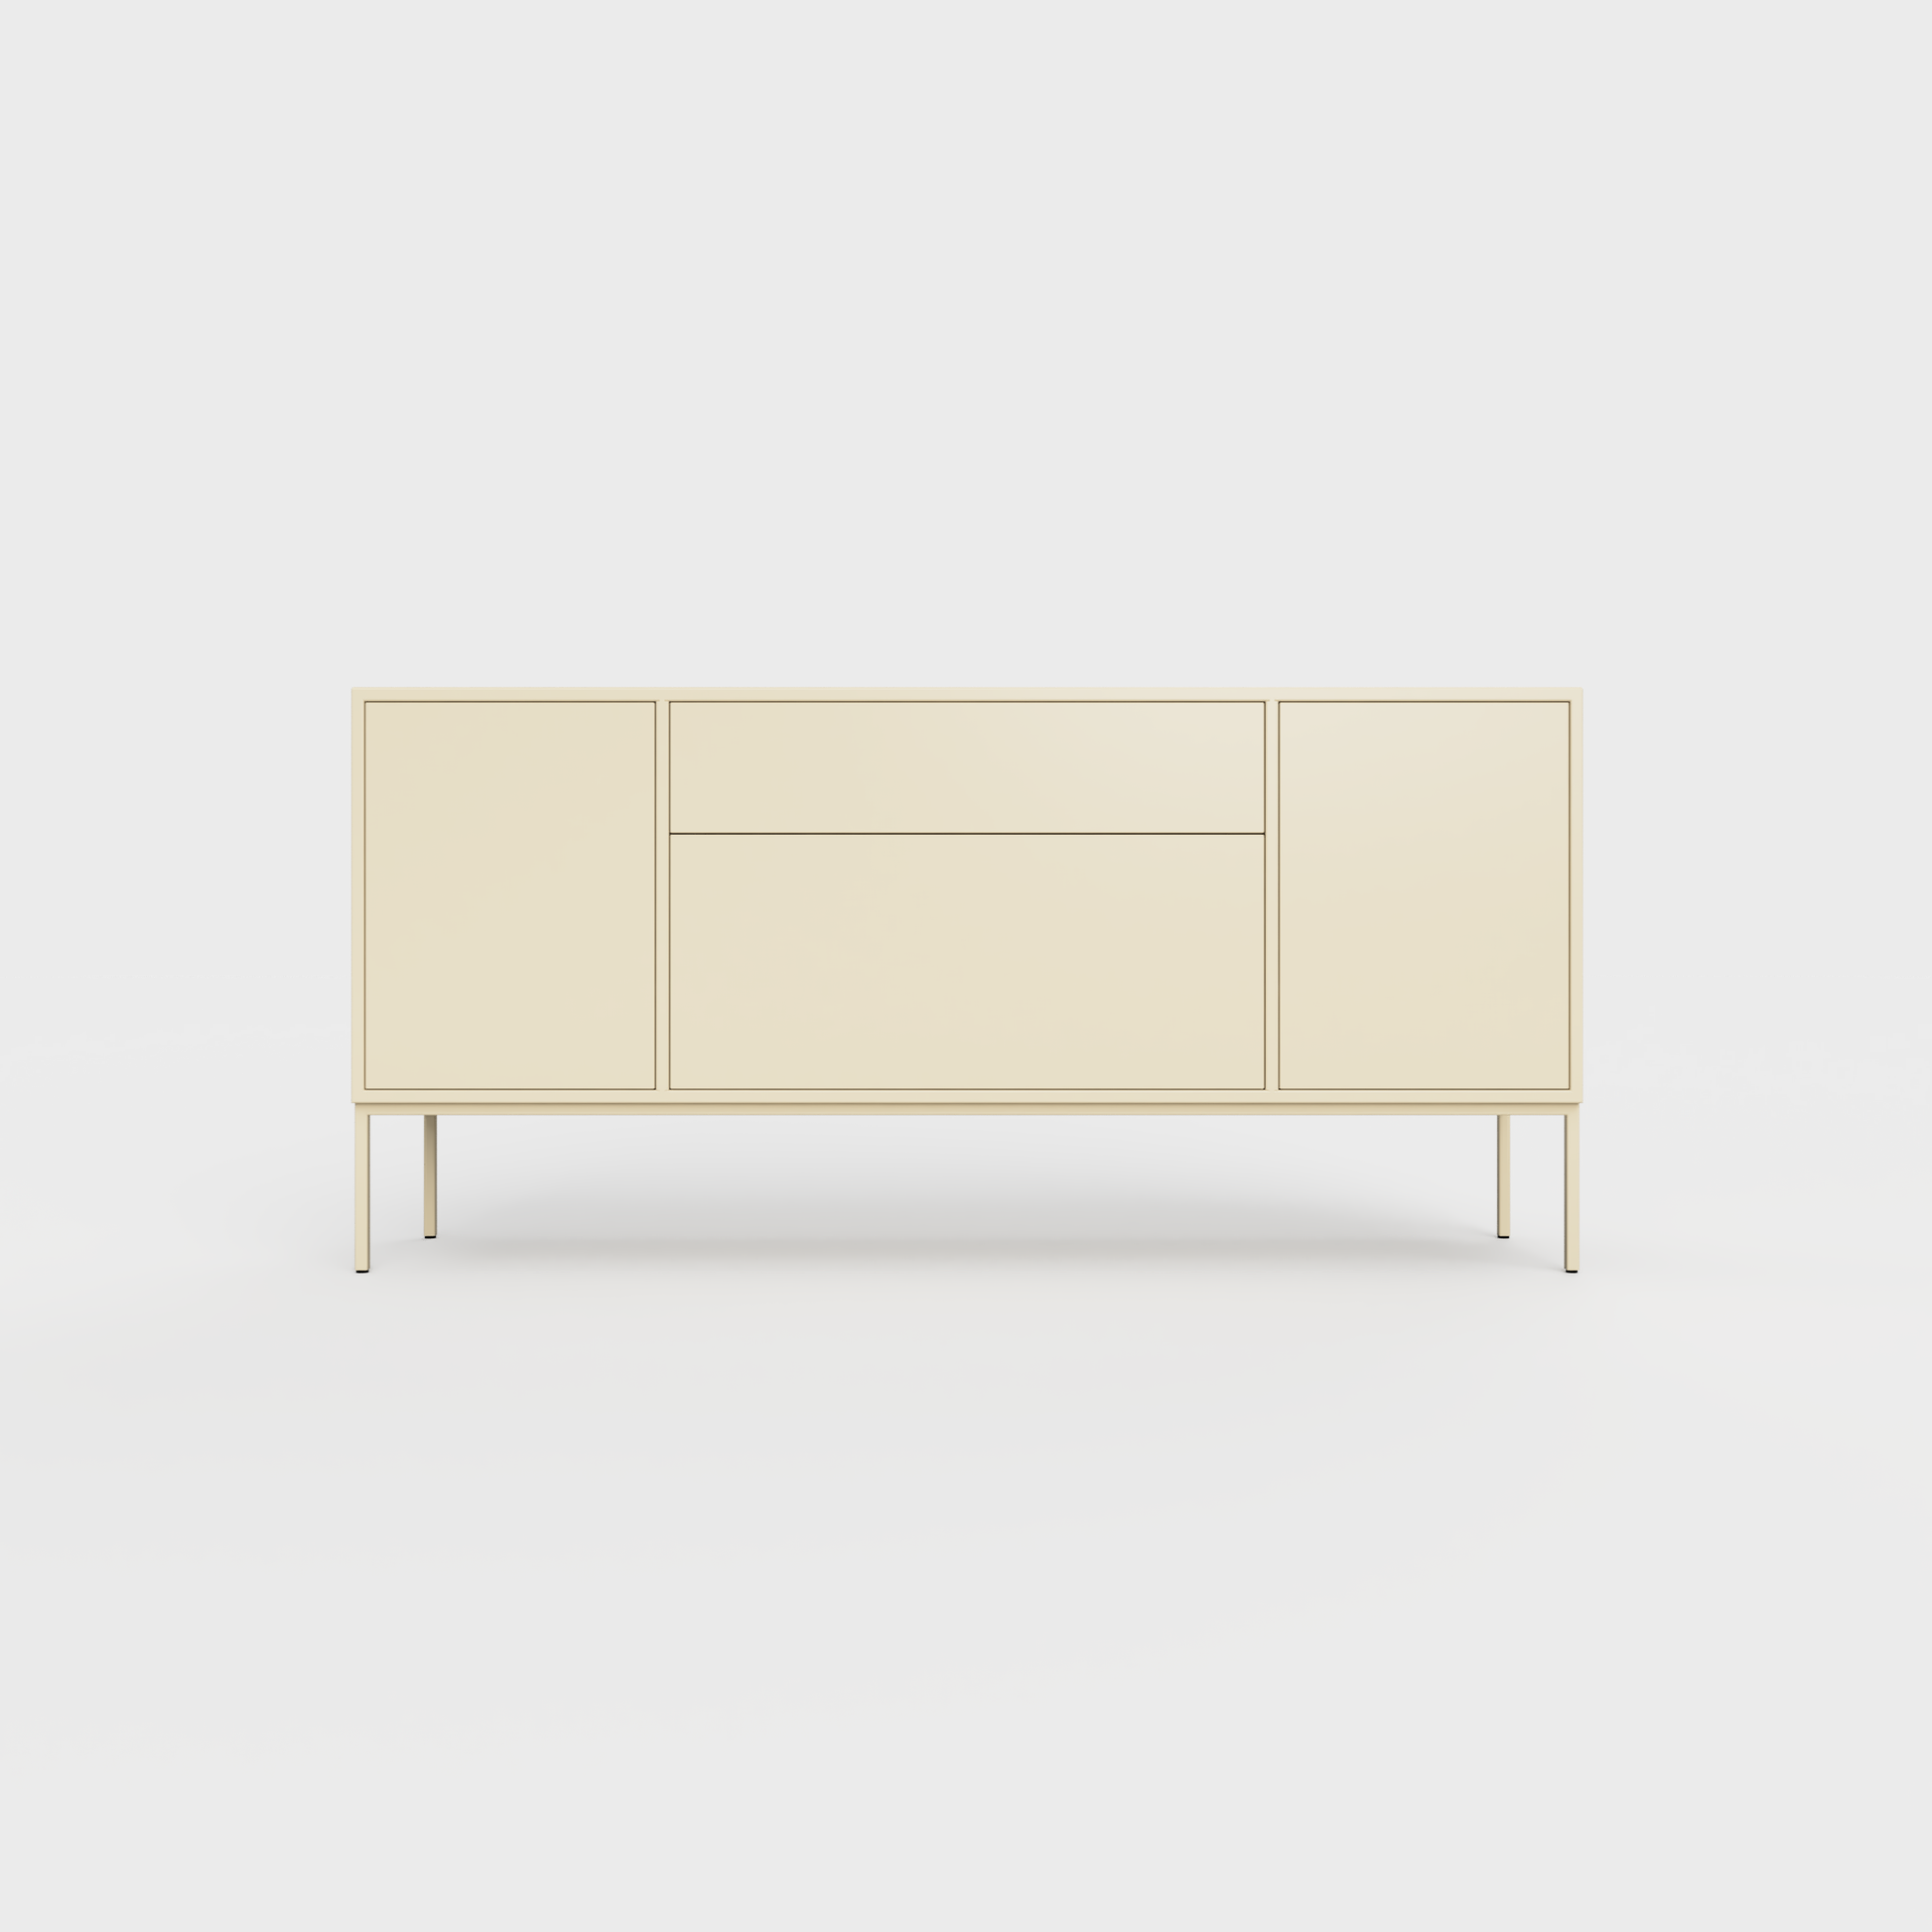 Arnika 02 Sideboard in Sand color, powder-coated steel, elegant and modern piece of furniture for your living room